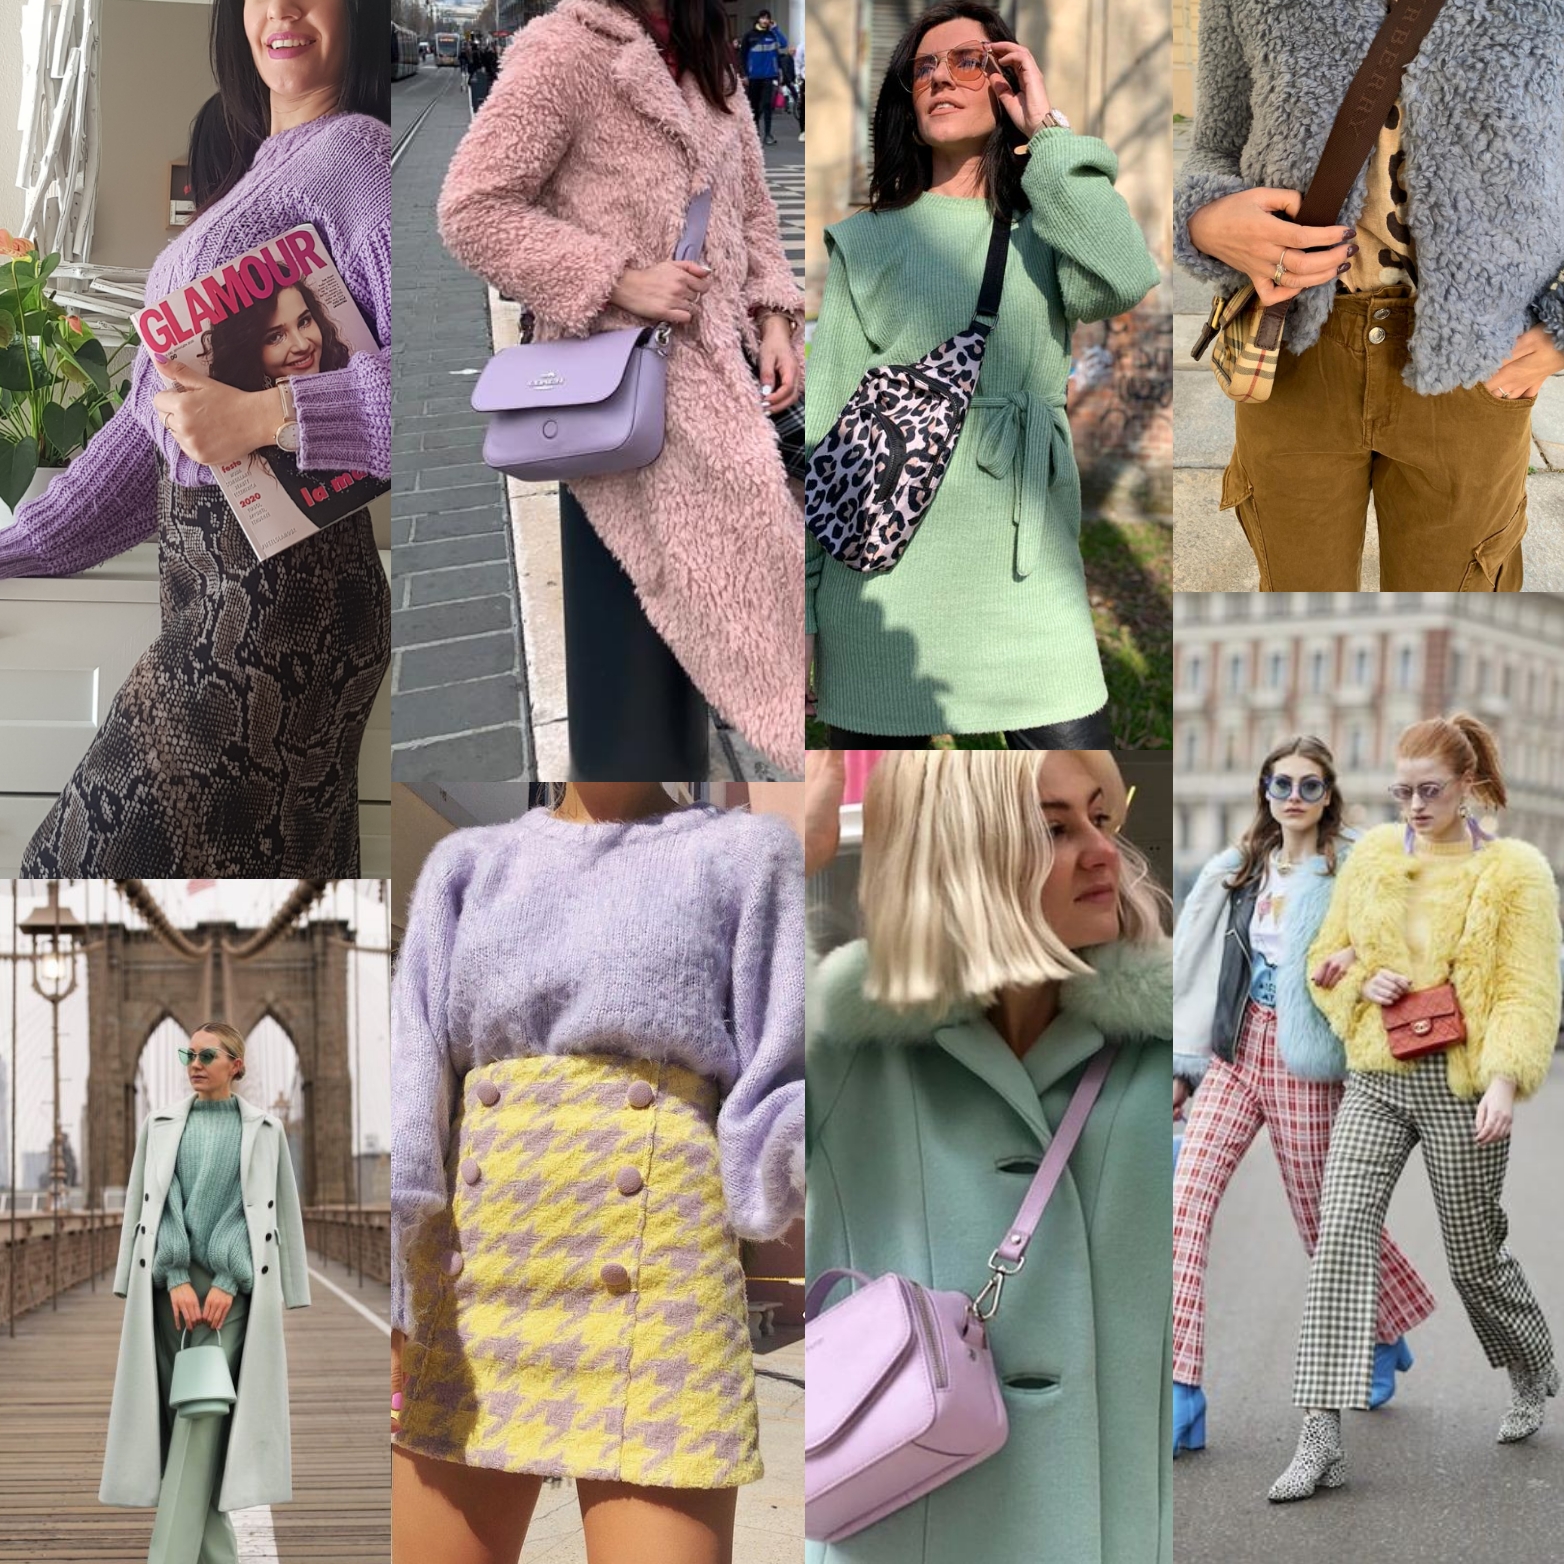 [:it]Pastel lover: For lovers of pastel colors how to mix them in winter[:in]PASTEL LOVER: FOR LOVERS OF PASTEL COLORS HOW TO MIX THEM IN WINTER[:]